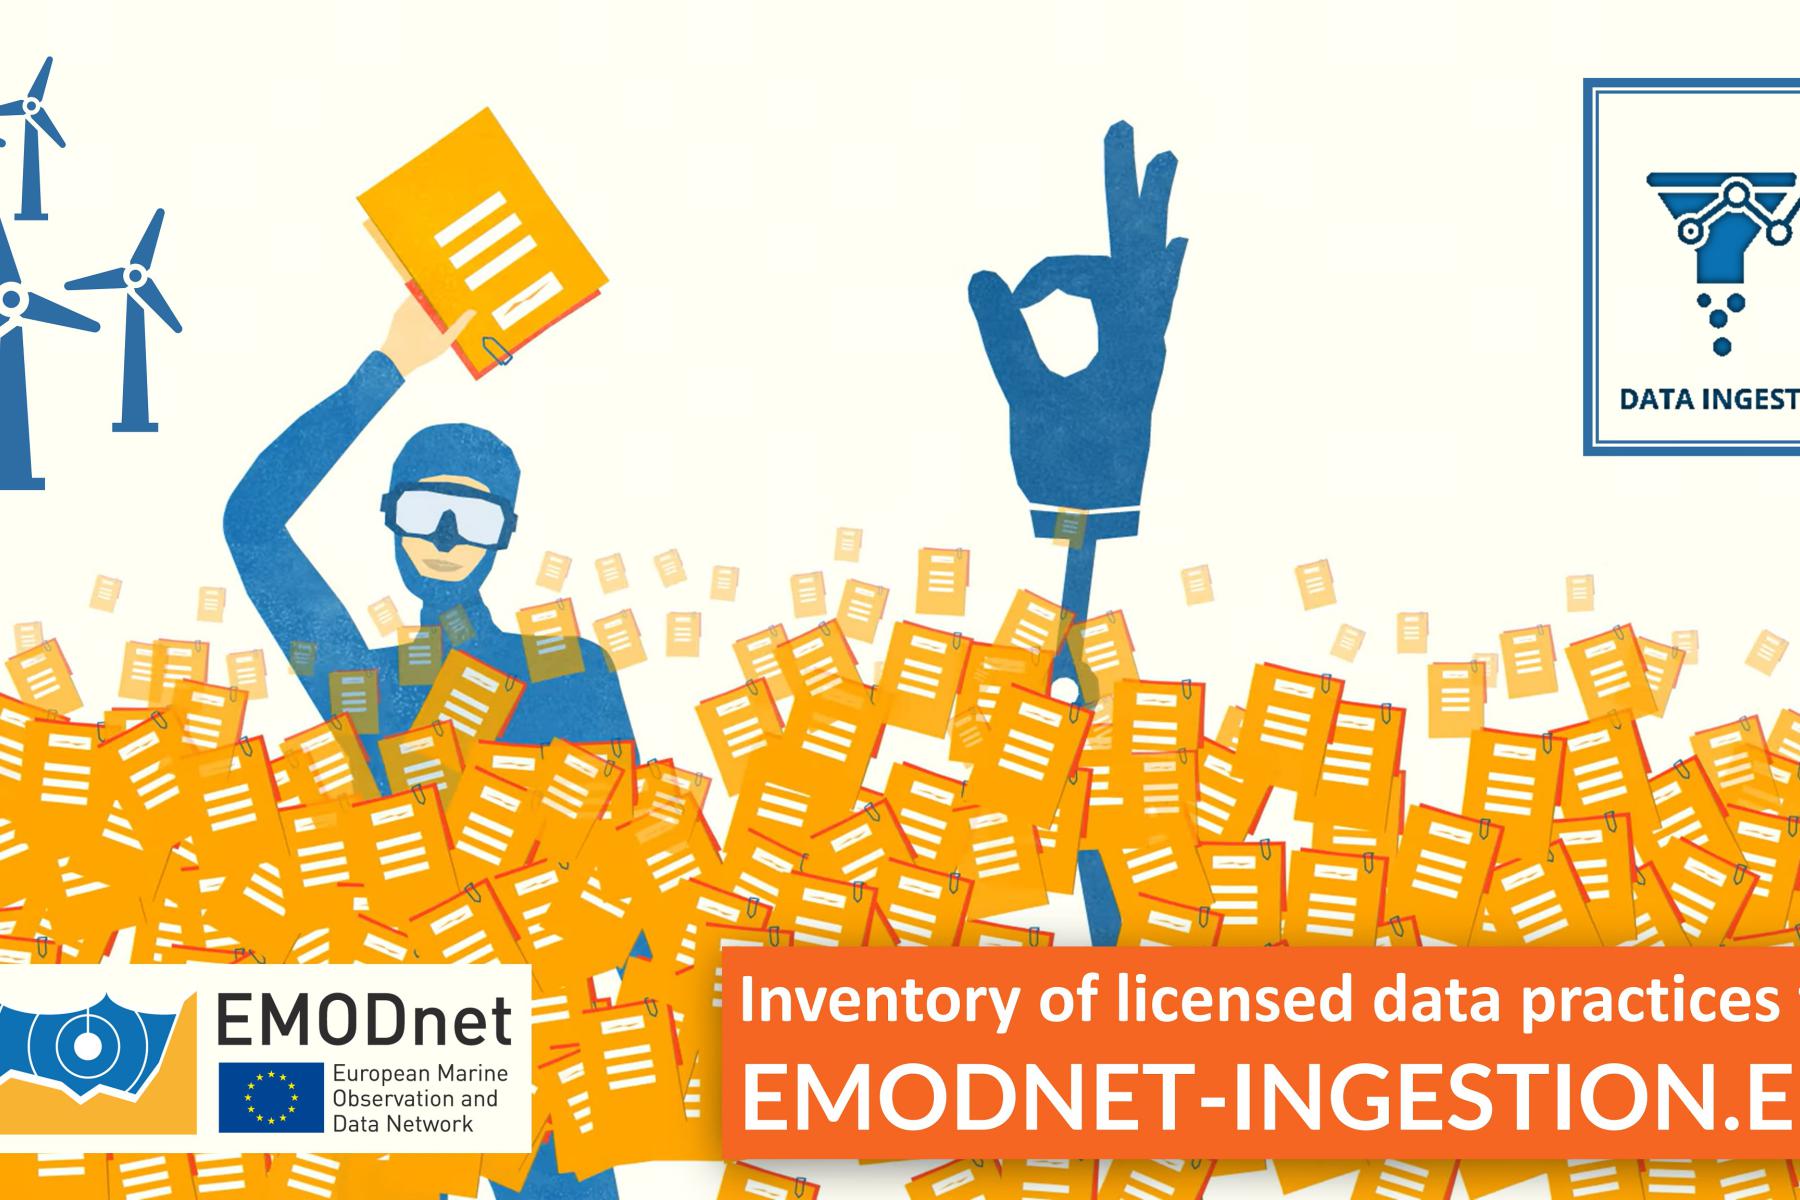 Visual promoting the inventory of licensed data practices for EMODnet Ingestion